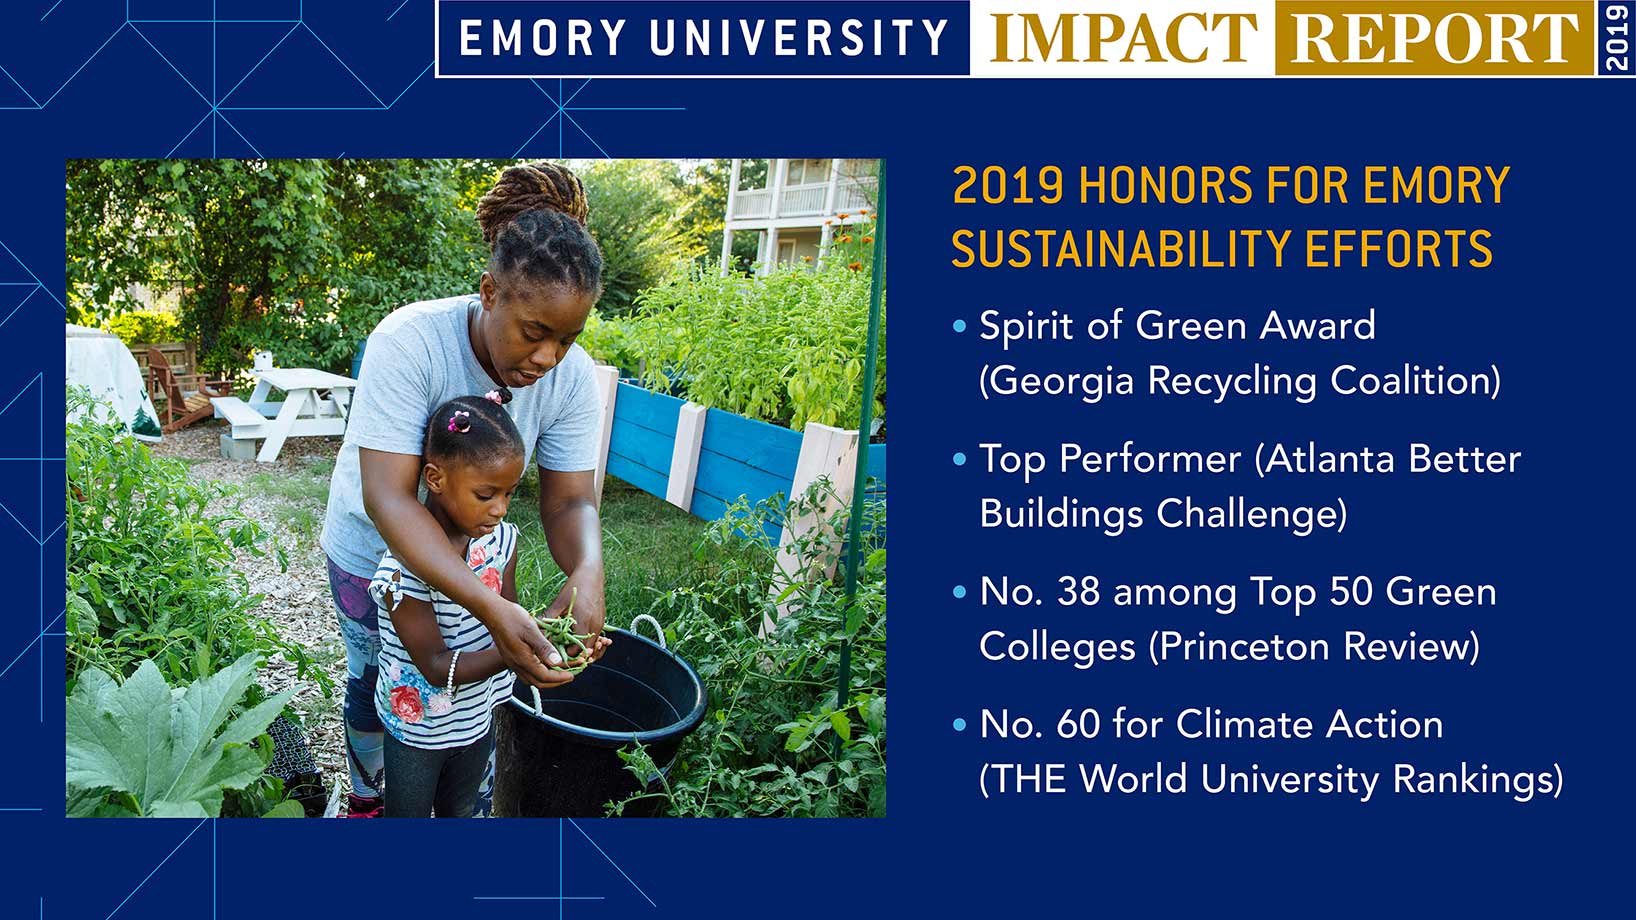 2019 Honors for Emory Sustainability Efforts: Spirit of Green Award (Georgia Recycling Coalition); Top Performer (Atlanta Better Buildings Challenge); No. 38 among Top 50 Green Colleges (Princeton Review); No. 60 for Climate Action (THE World University Rankings)